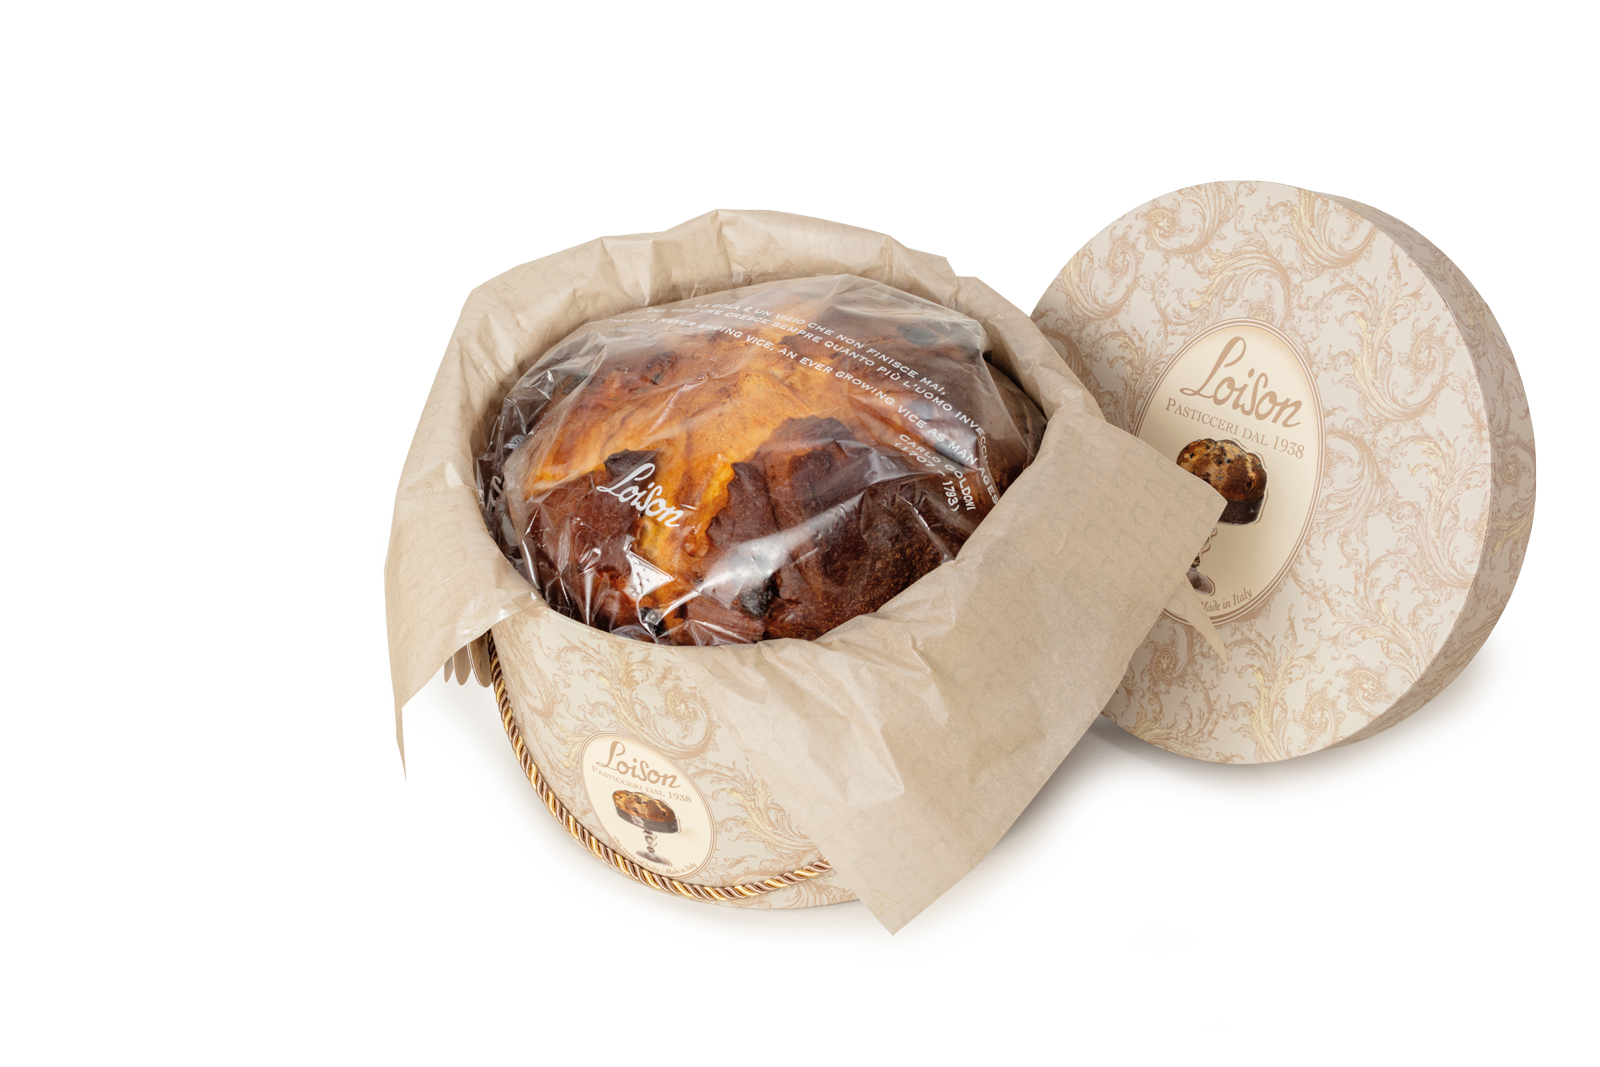 Traditional Artisan Italian Panettone in a hat box Loison